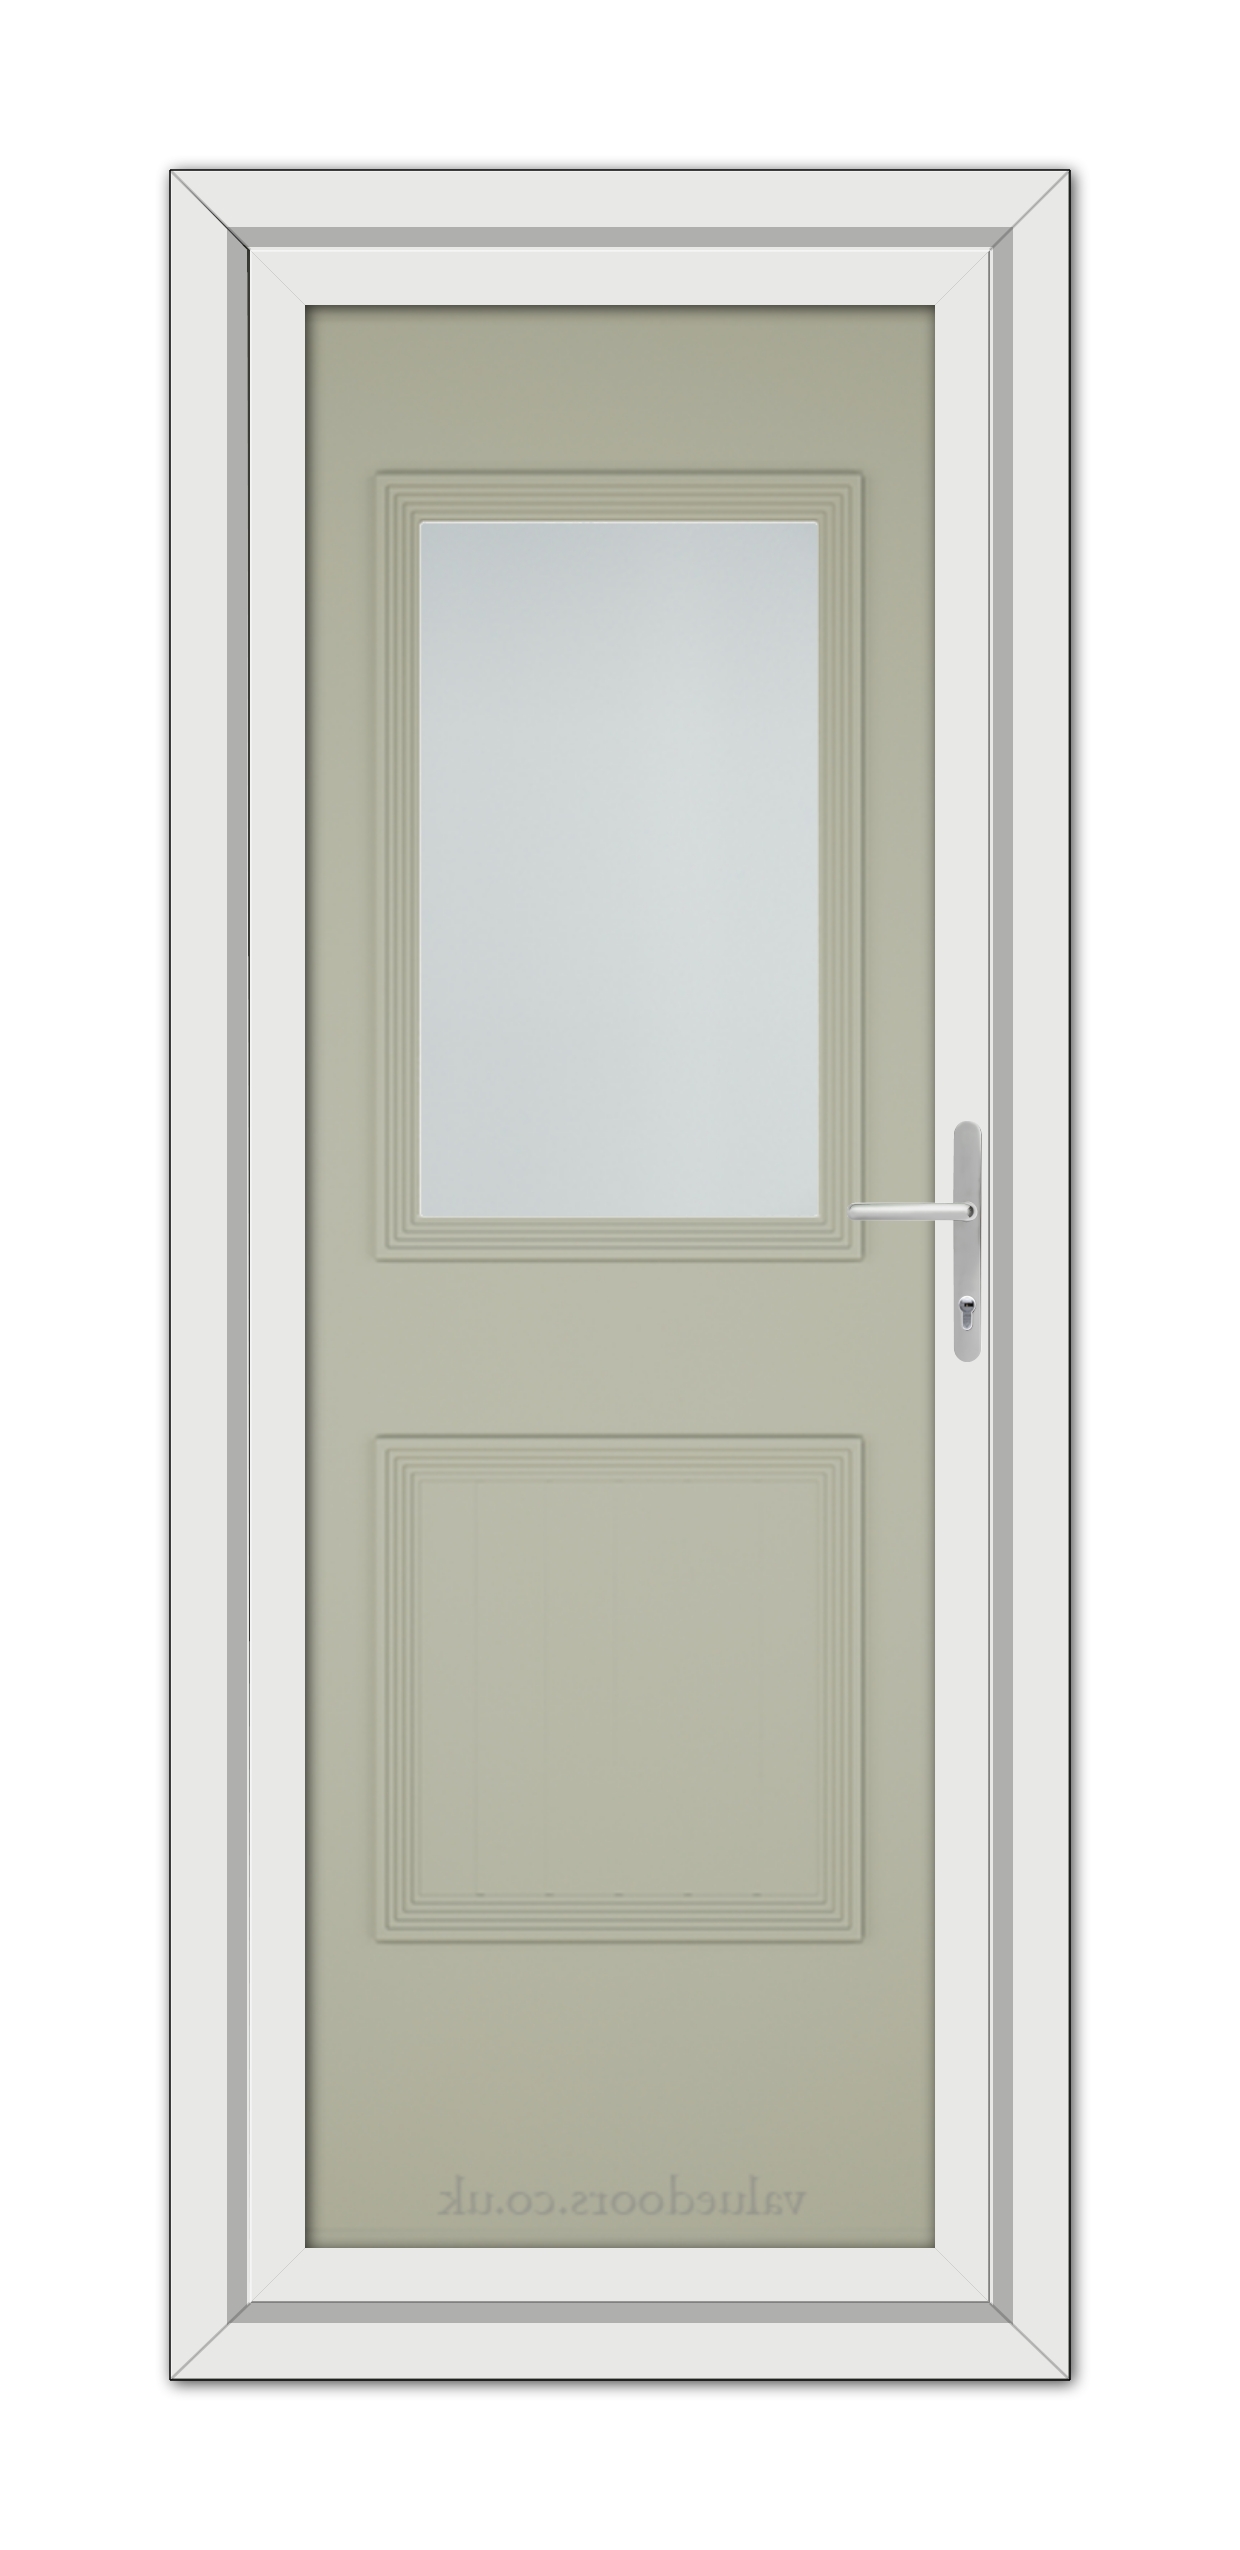 A vertical image of a closed, modern Agate Grey Alnwick One uPVC door with a rectangular glass panel on top, a solid panel on the bottom, and a white handle on the right.